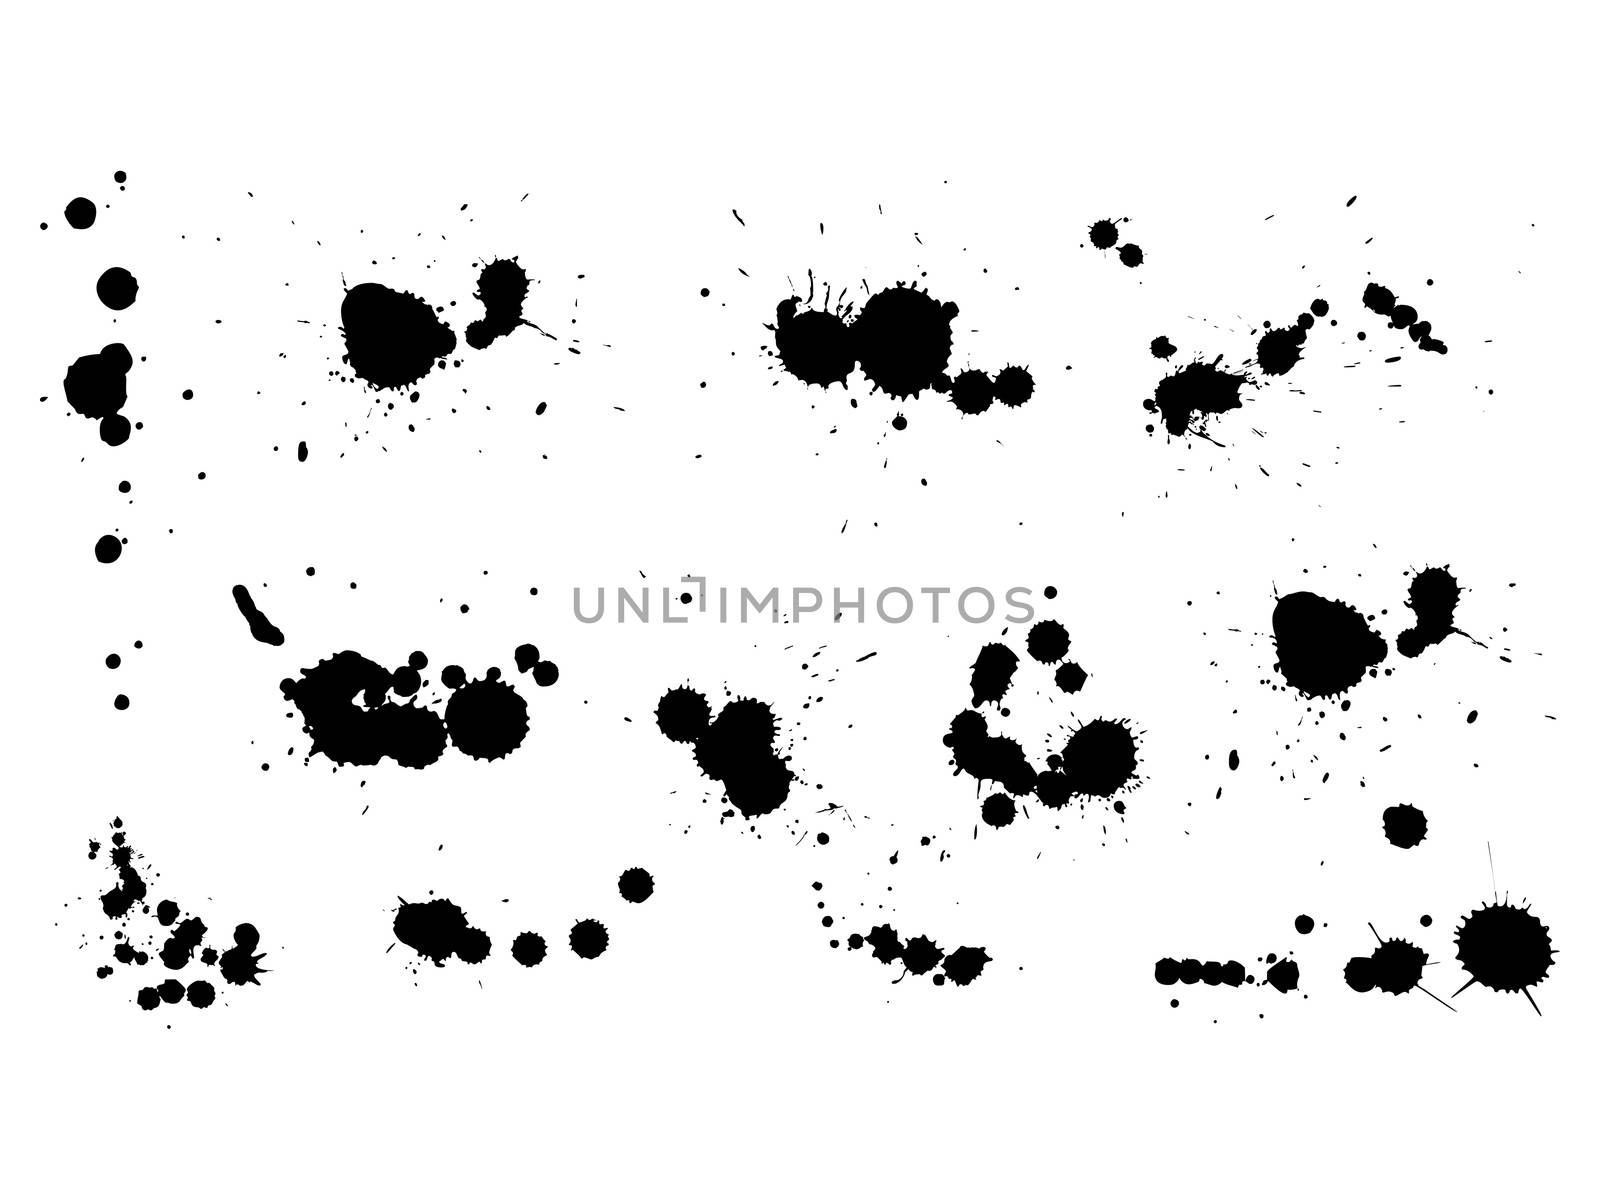 some kinds of blots from a brush, decoration elements